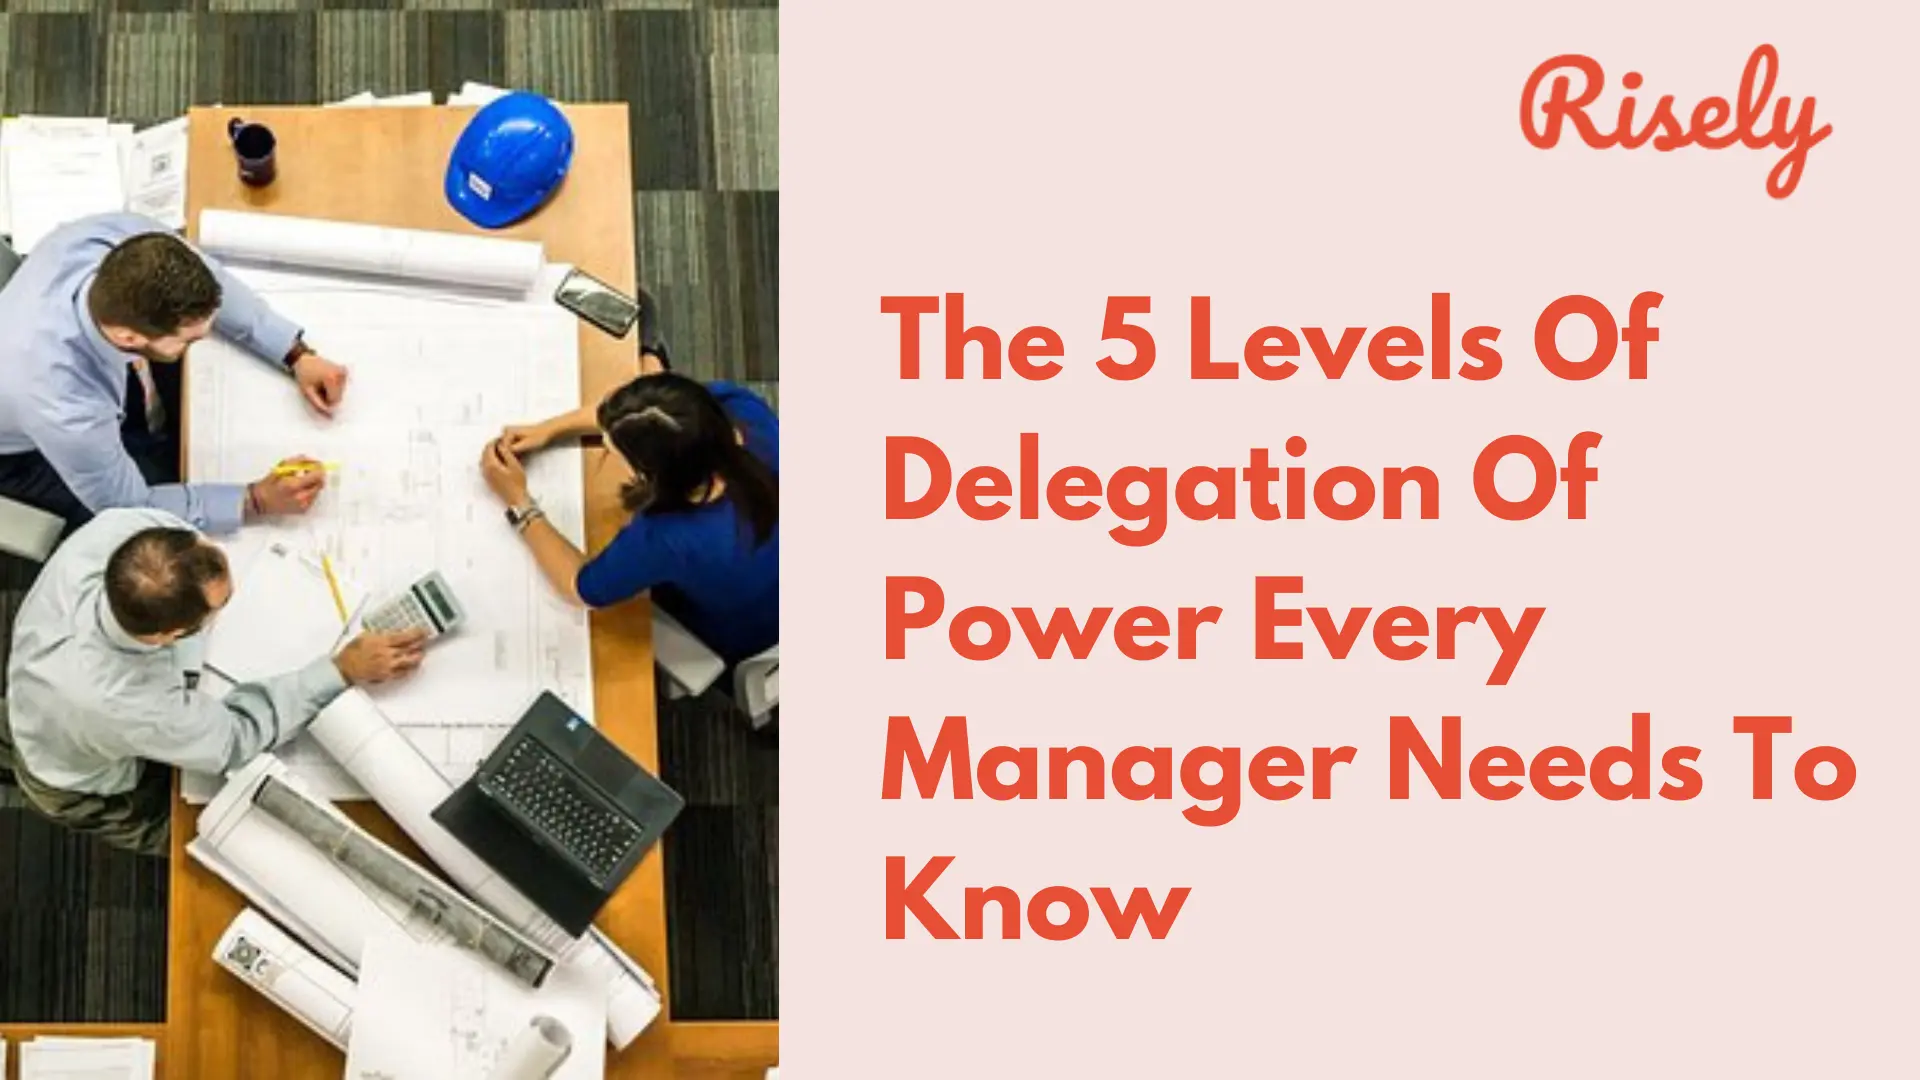 The 5 Levels Of Delegation Of Power Every Manager Needs To Know